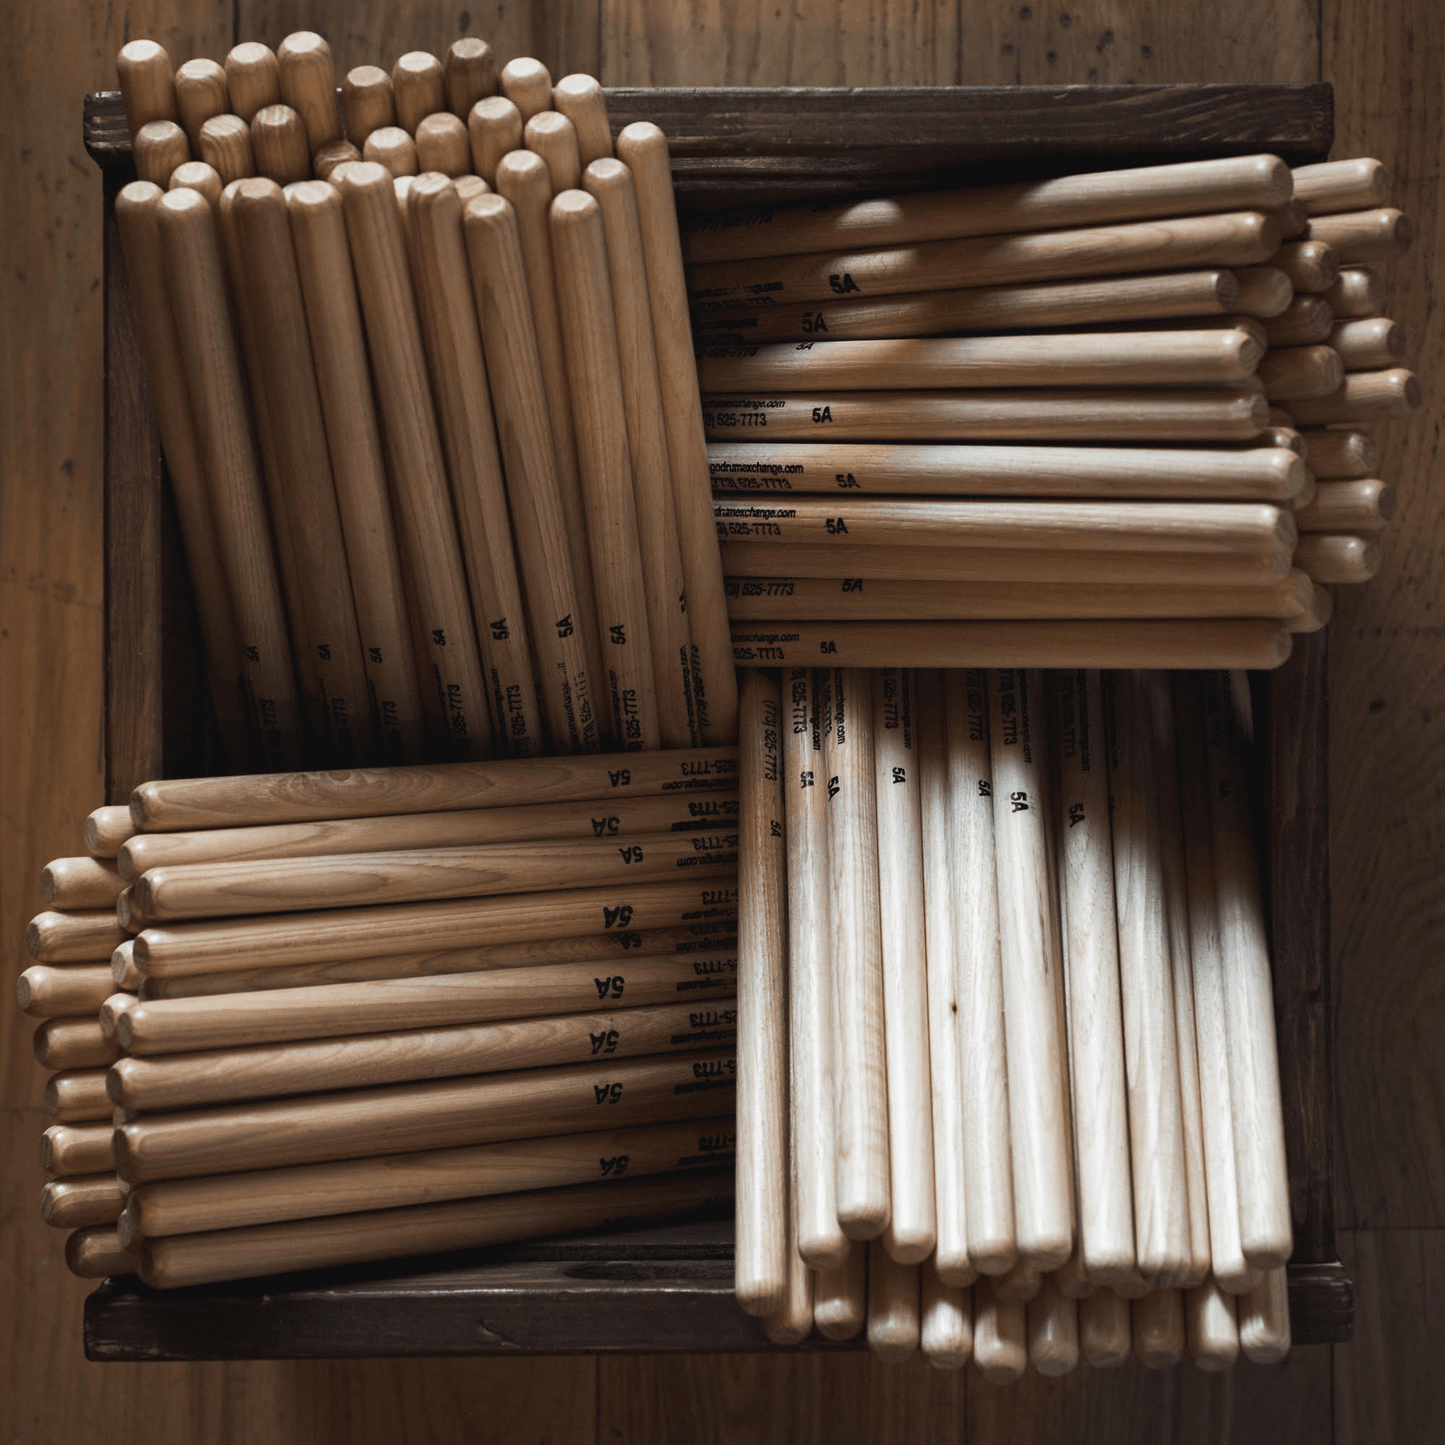 Chicago Drum Exchange 5A Vater Wood Tip Custom Imprint Drum Sticks (6 Pair Bundle) Drums and Percussion / Parts and Accessories / Drum Sticks and Mallets